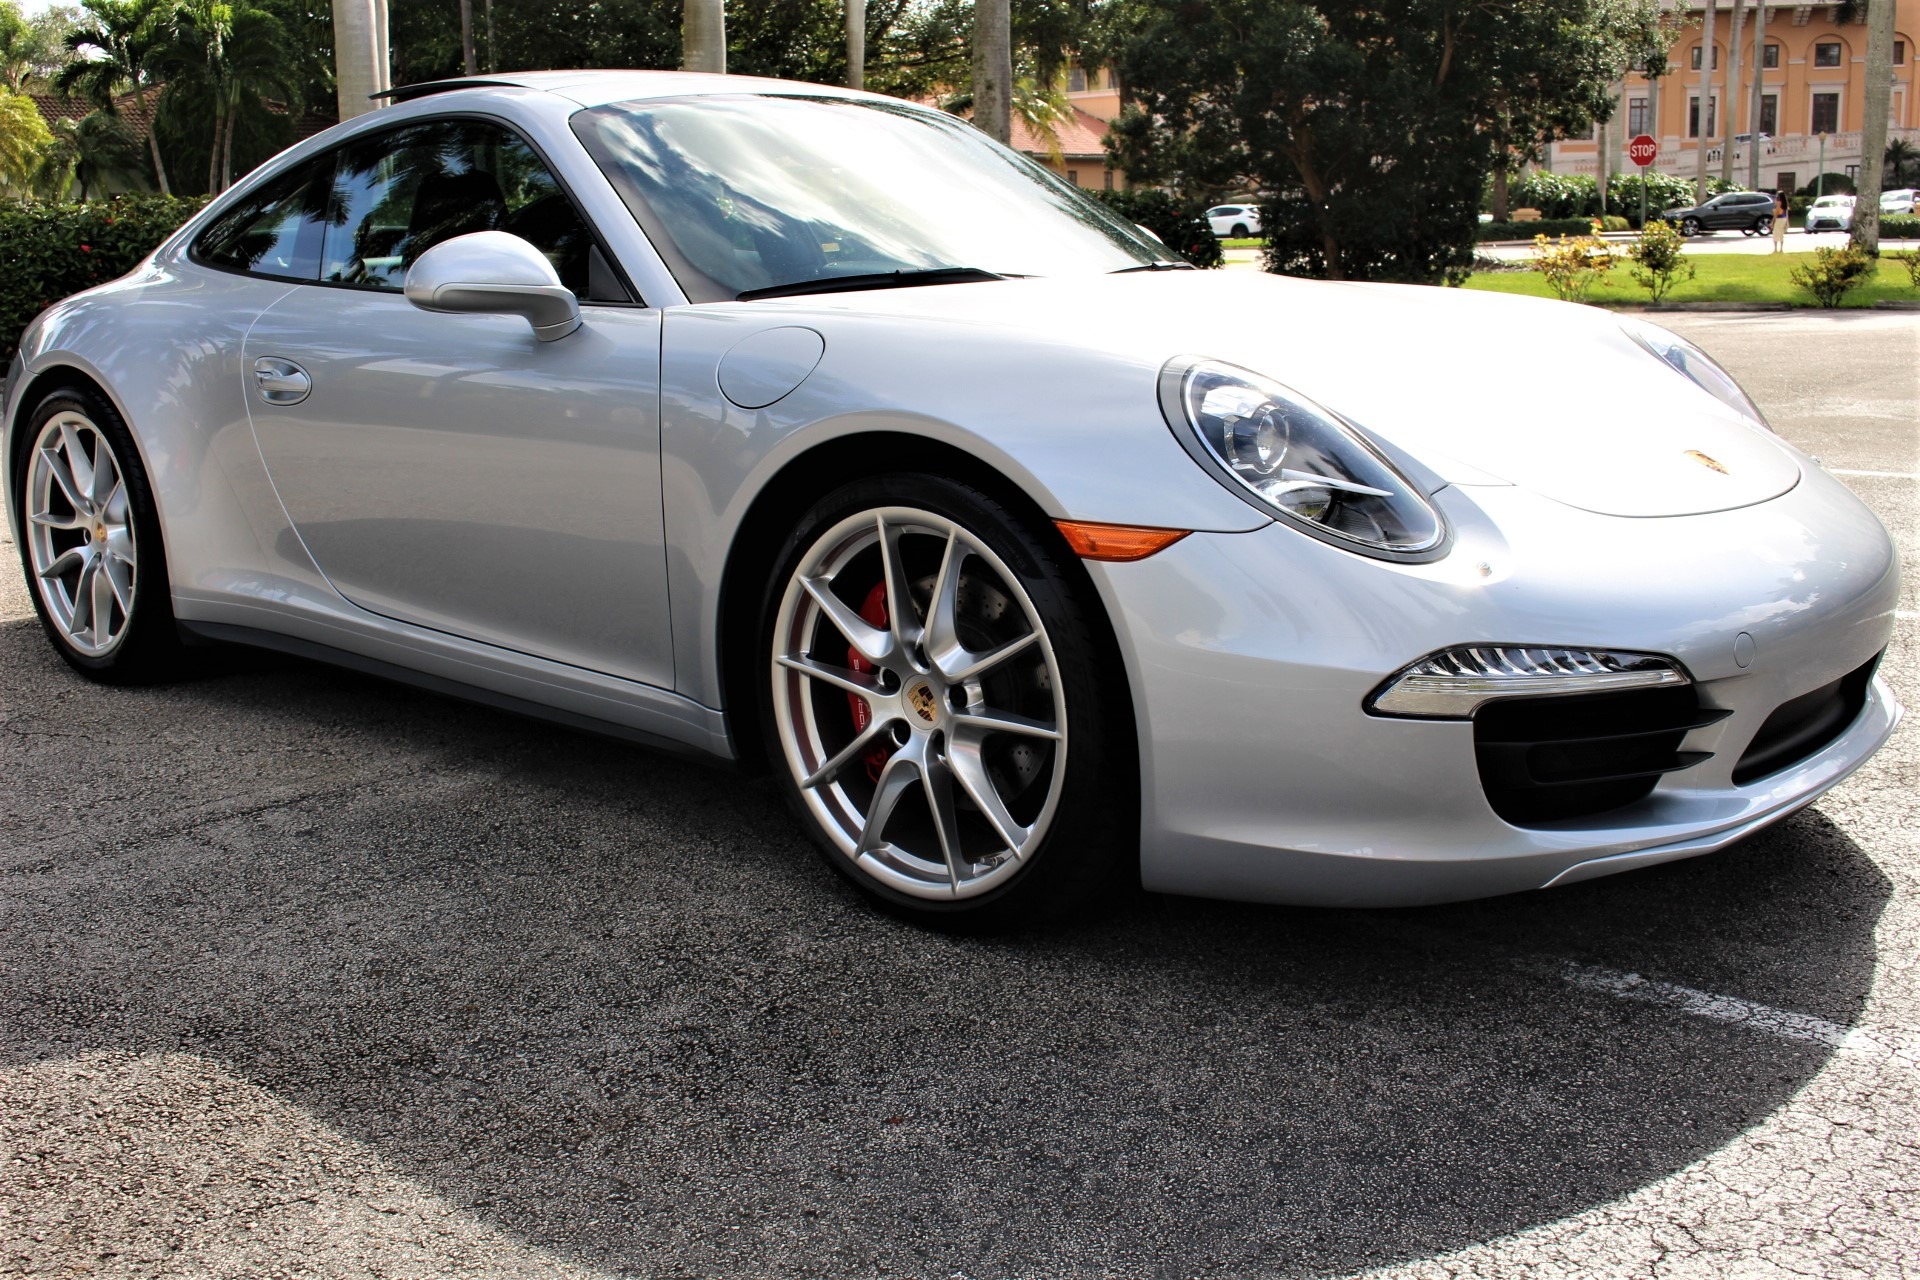 Used 2014 Porsche 911 Carrera 4S for sale Sold at The Gables Sports Cars in Miami FL 33146 3